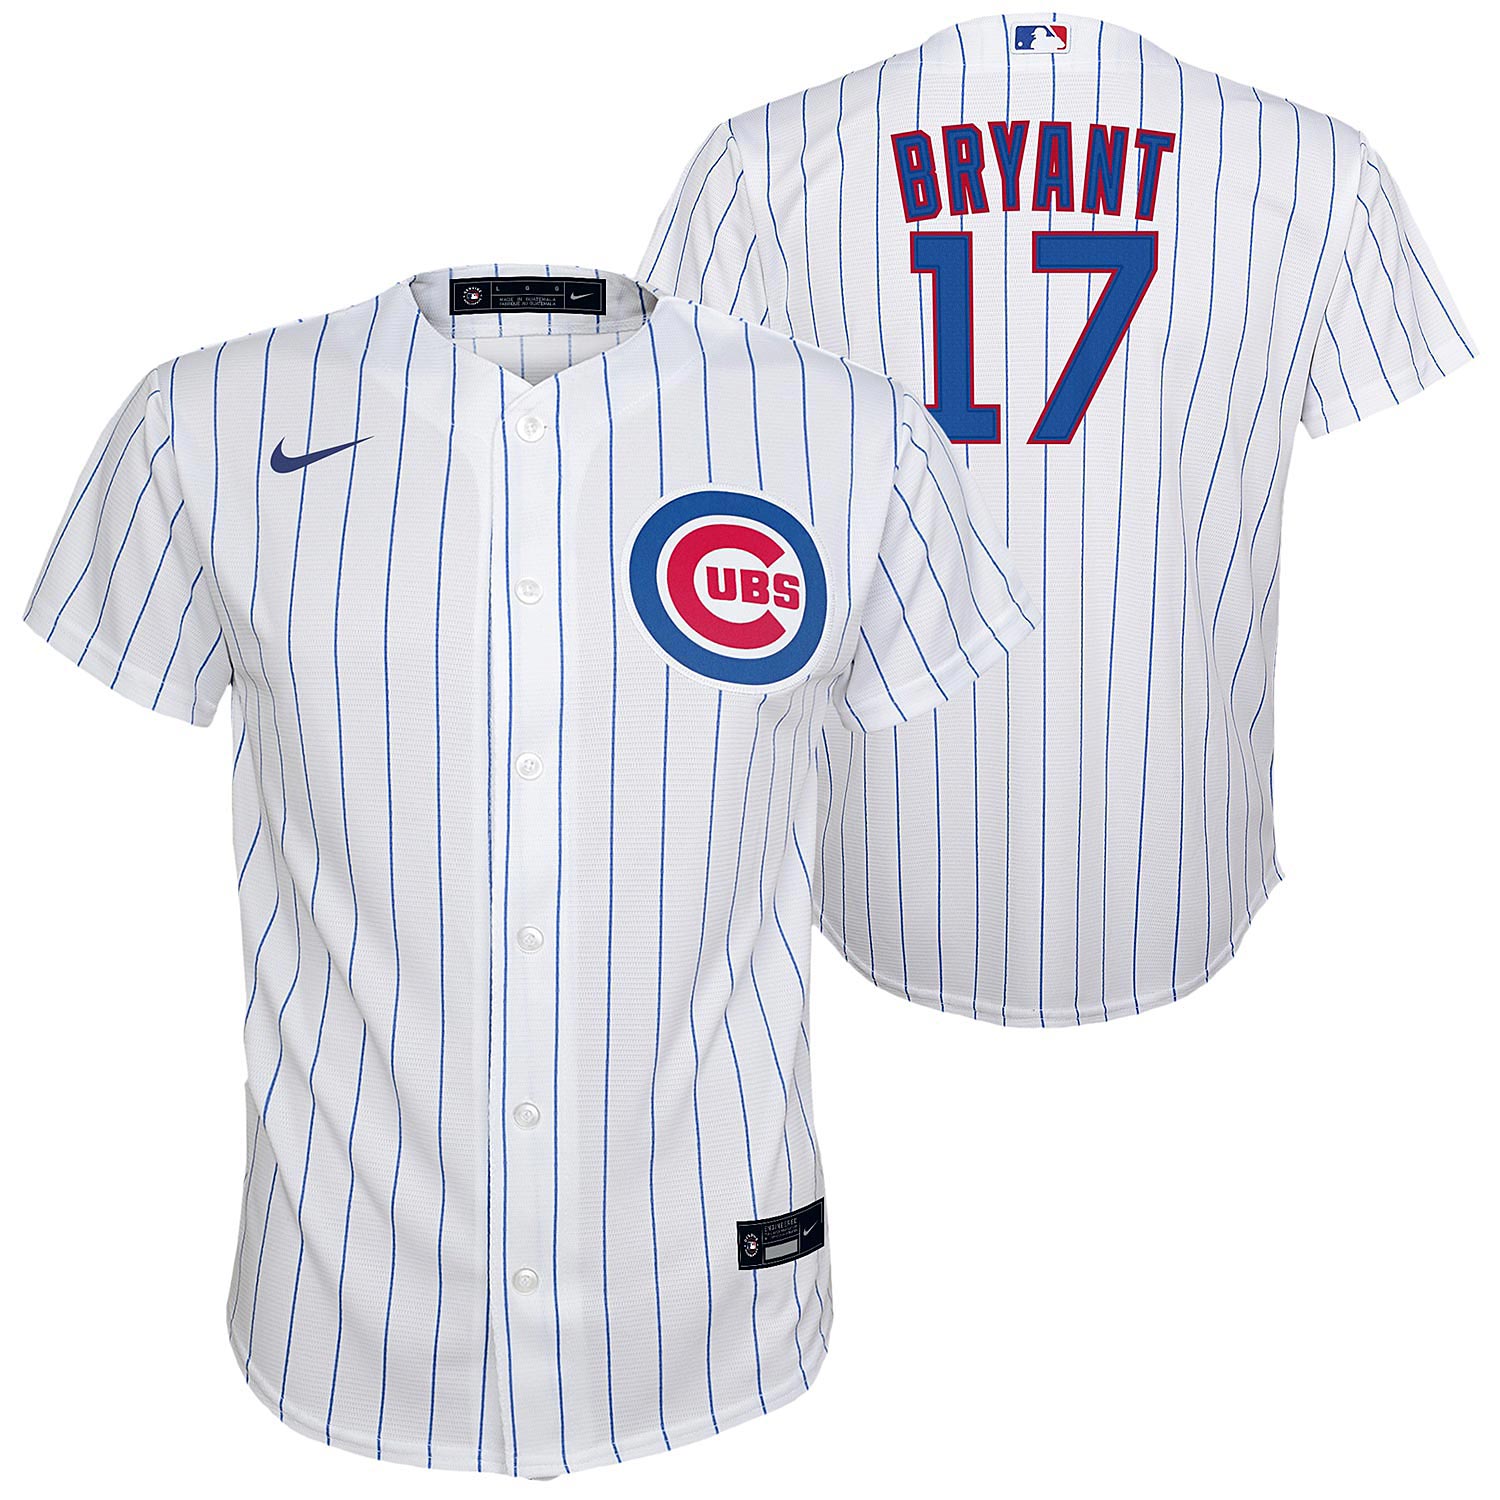 Chicago Cubs Nike Kris Bryant Road Replica Jersey With Authentic Lettering